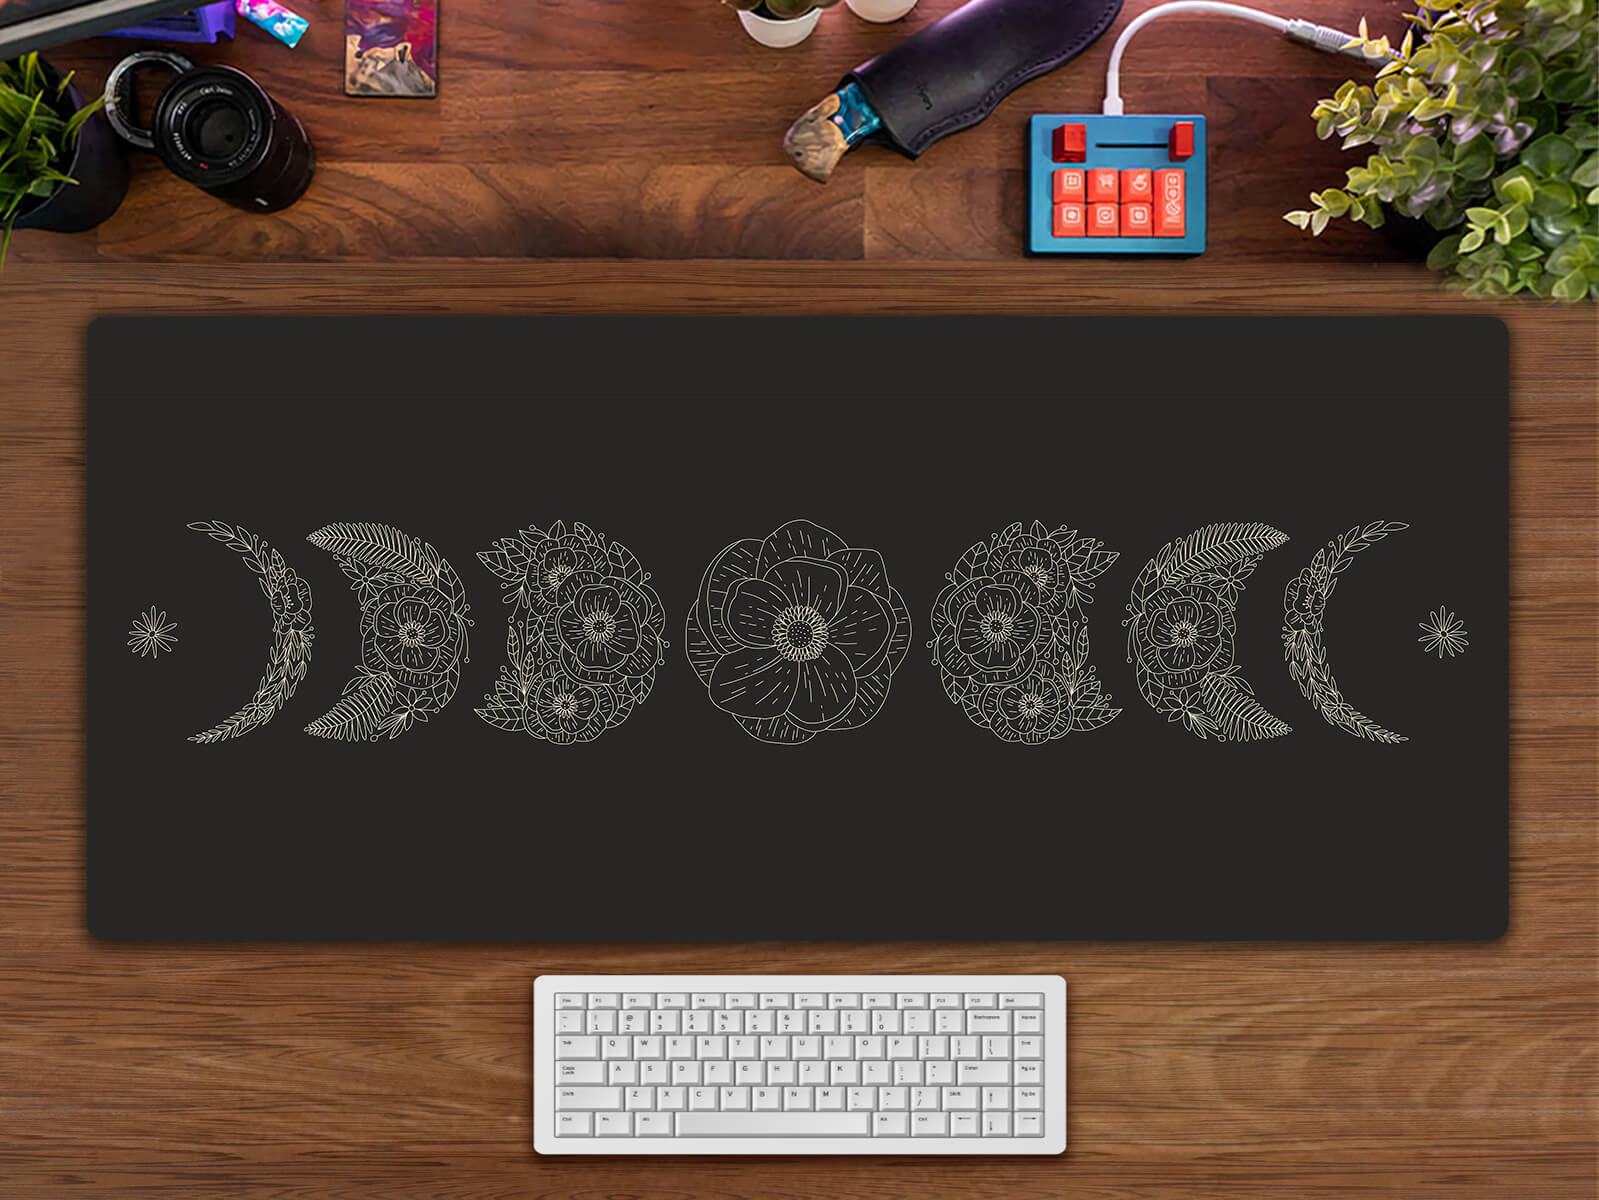 Floral Moon Phases Mouse pad XXL(2 Designs)